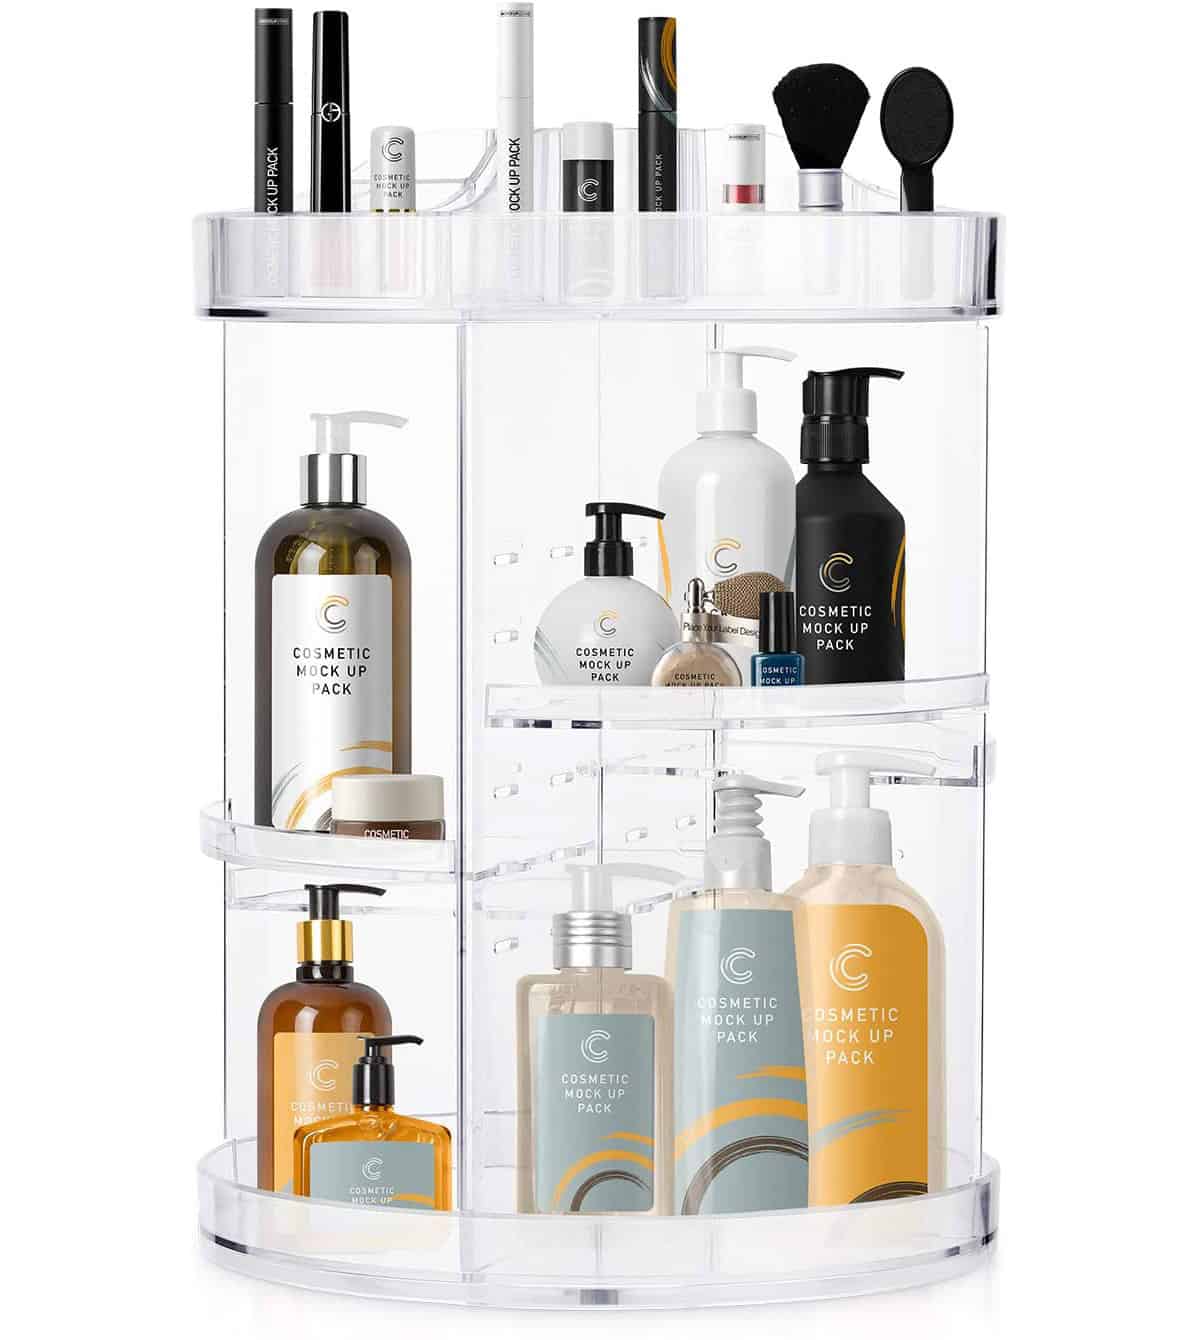 Rotating makeup organizer with compartments filled with bottles and makeup.